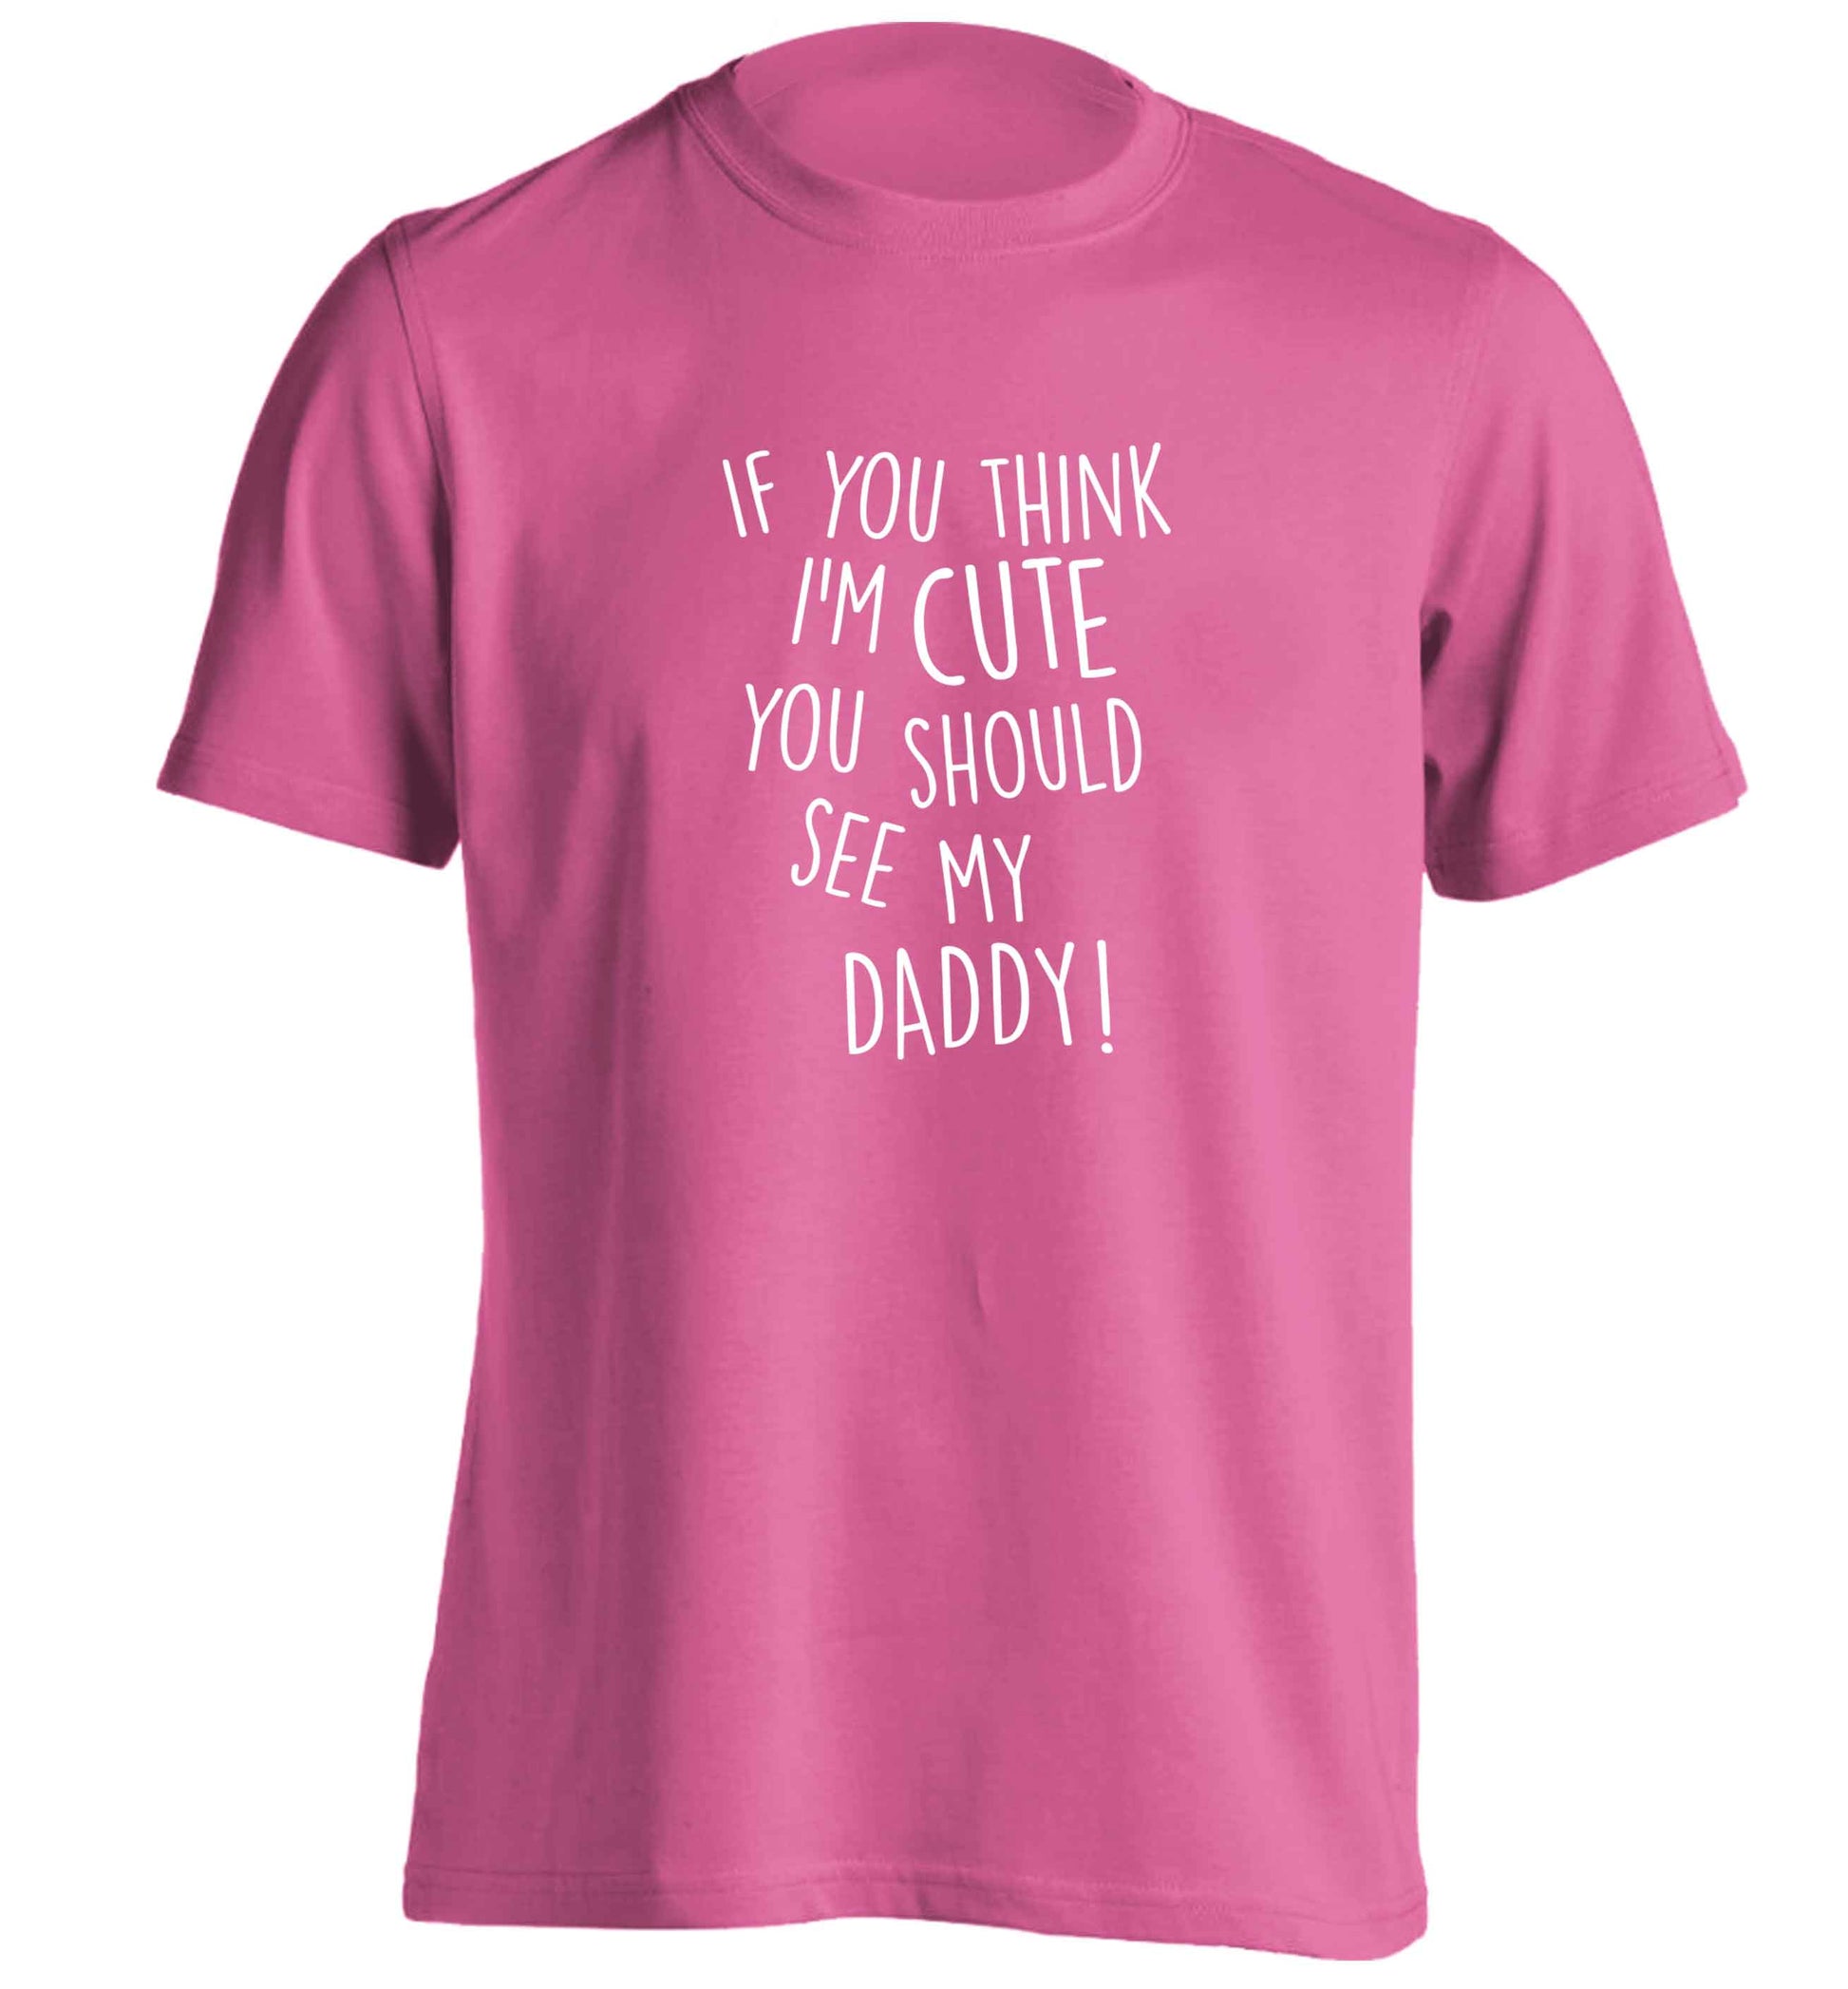 If you think I'm cute you should see my daddy adults unisex pink Tshirt 2XL